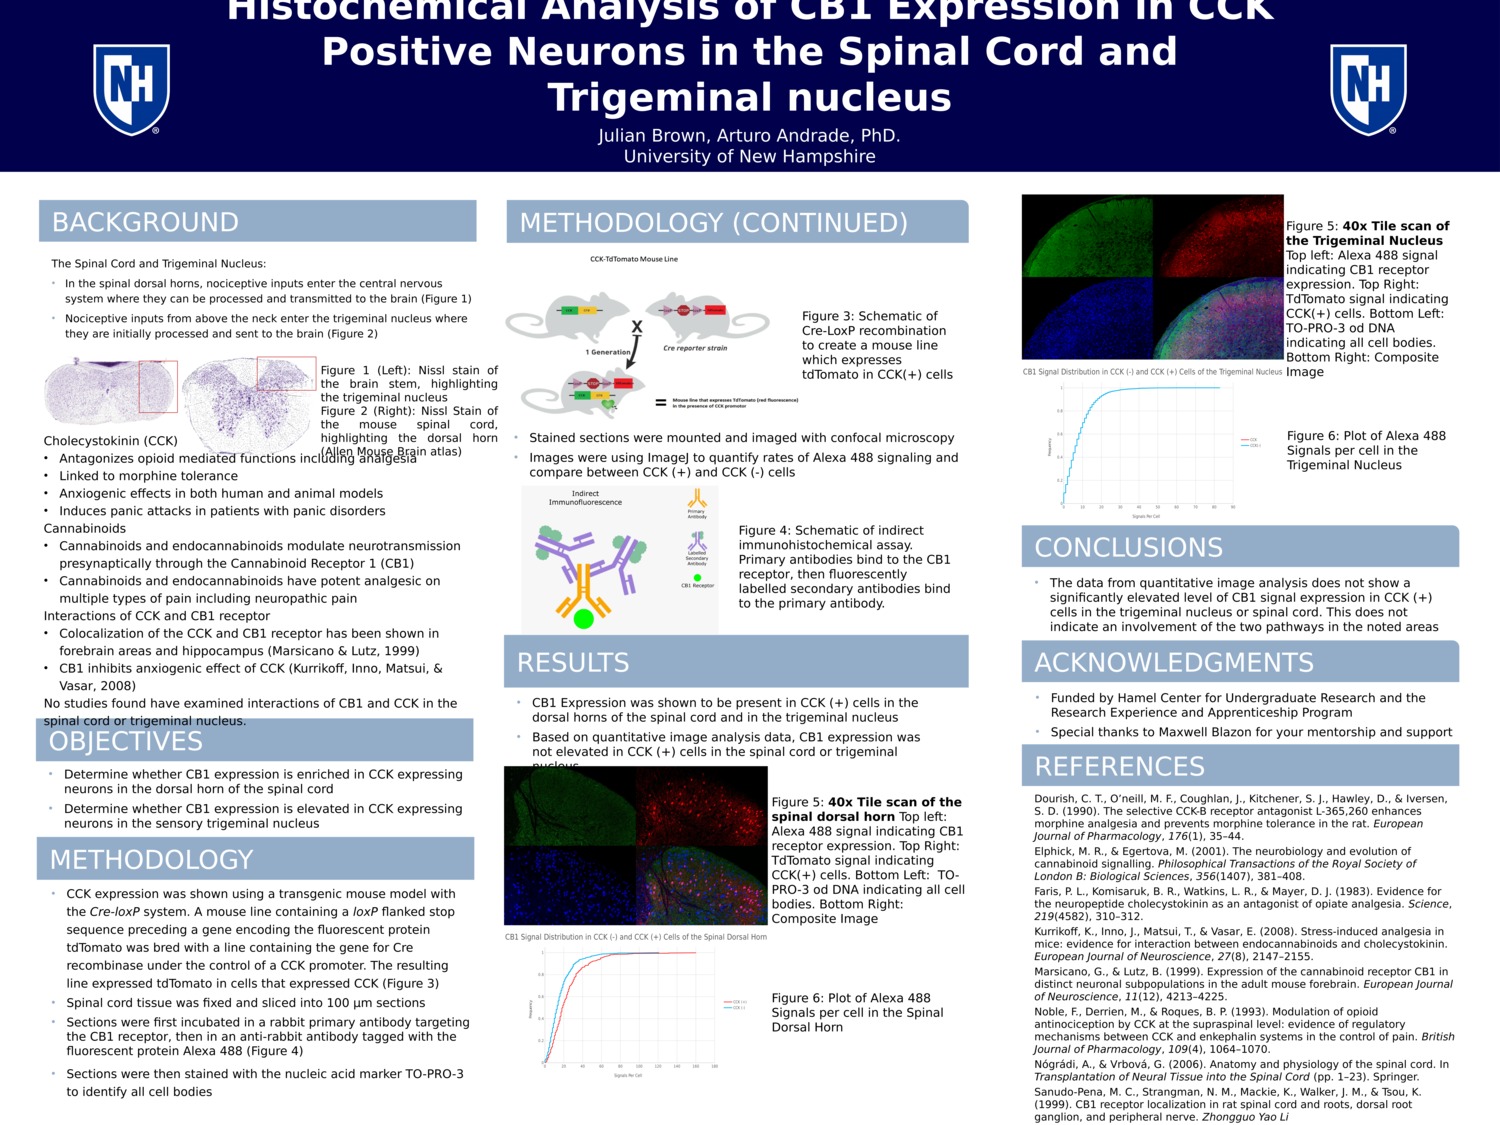 Histochemical Analysis Of Cb1 Expression In Cck Positive Neurons In The Spinal Cord And Trigeminal Nucleus by jdb1039